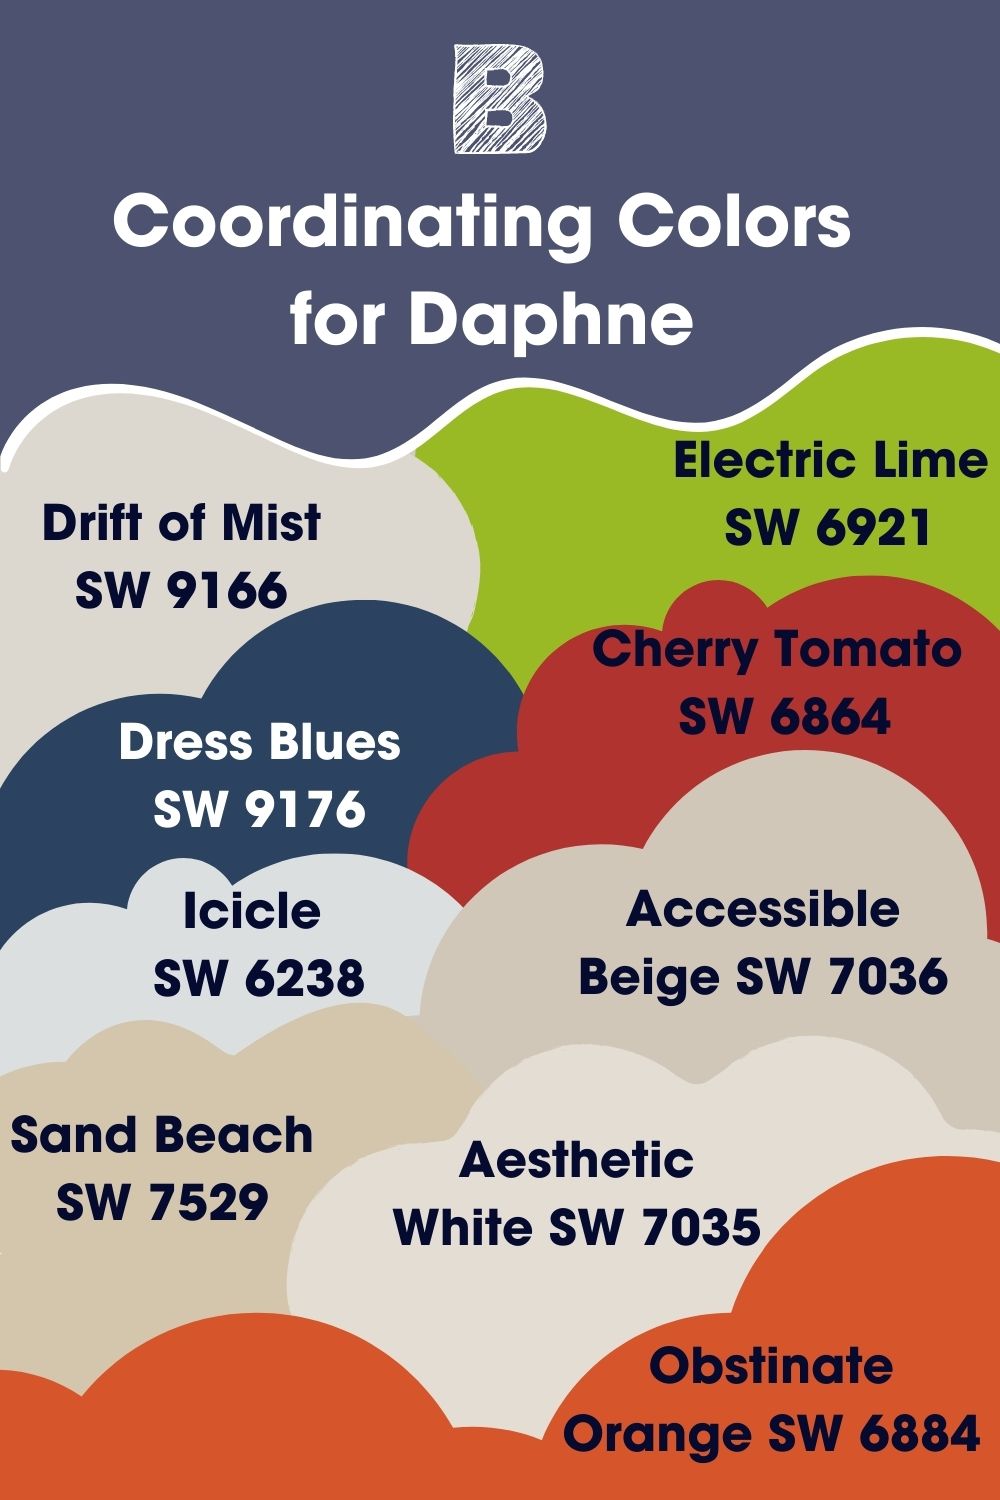 Coordinating Colors for Daphne